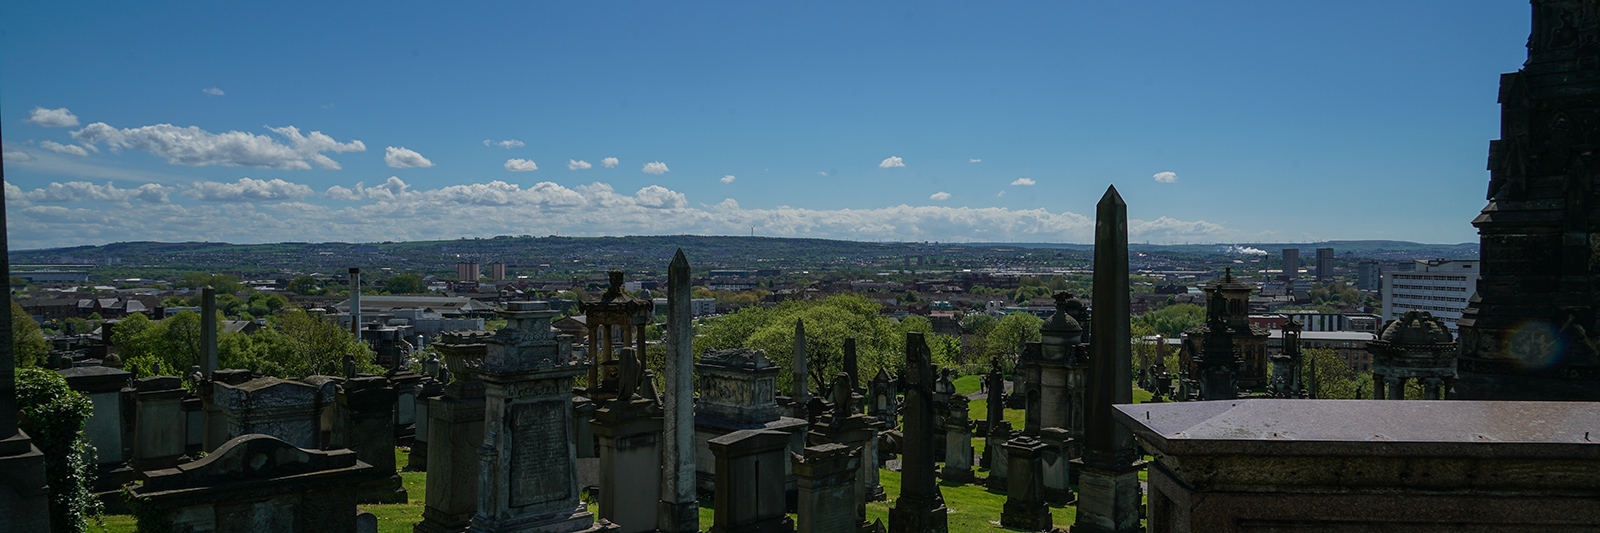 Looking south over the city from the Glasgow Necropolis, Glasgow, Scotland, 2018.